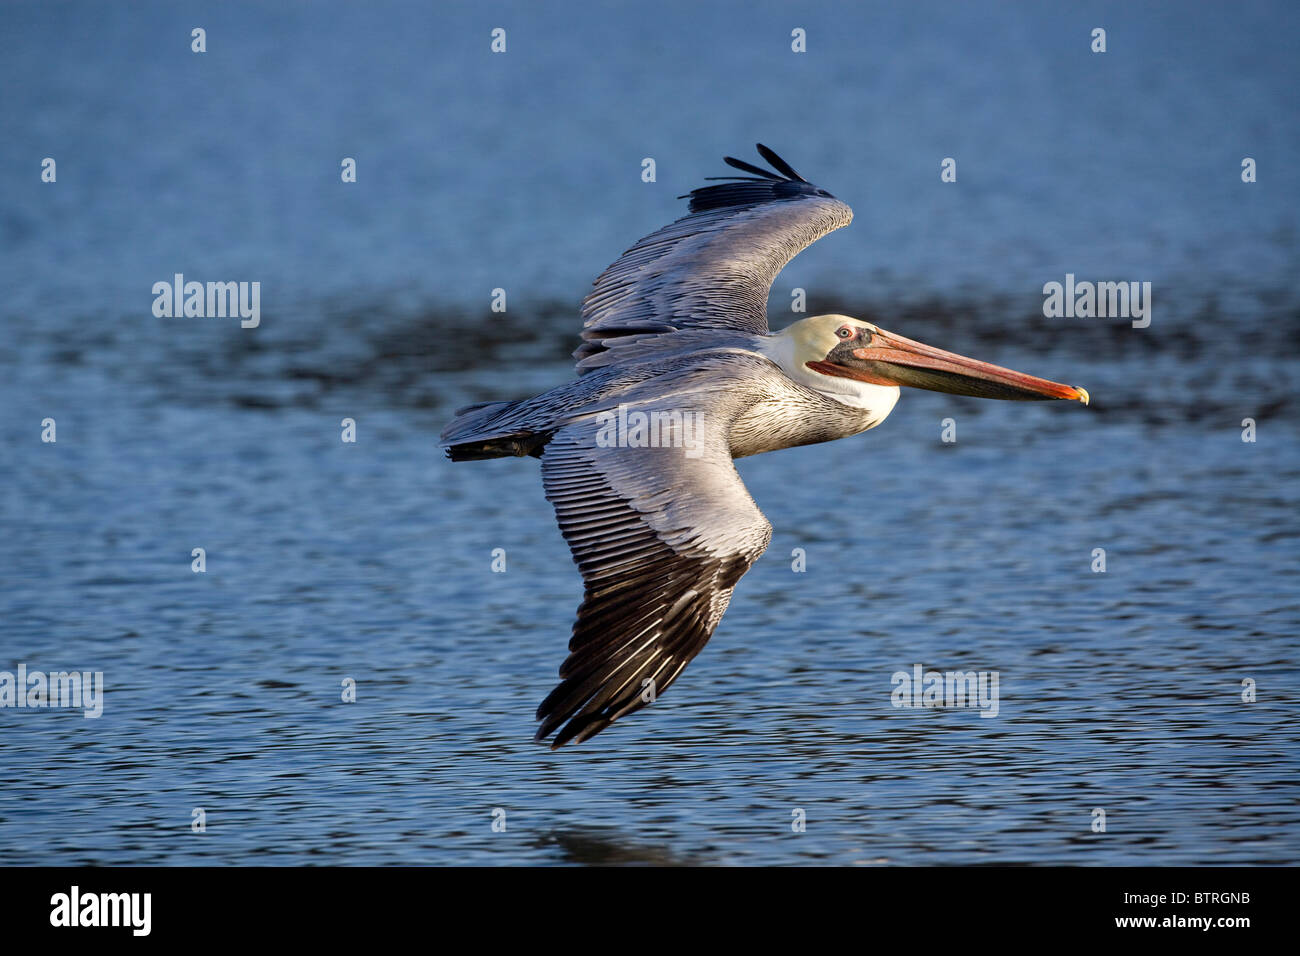 A brown pelican (Pelecanus occidentalis) glides over the waters of Elkhorn Slough in Moss Landing, California. Stock Photo